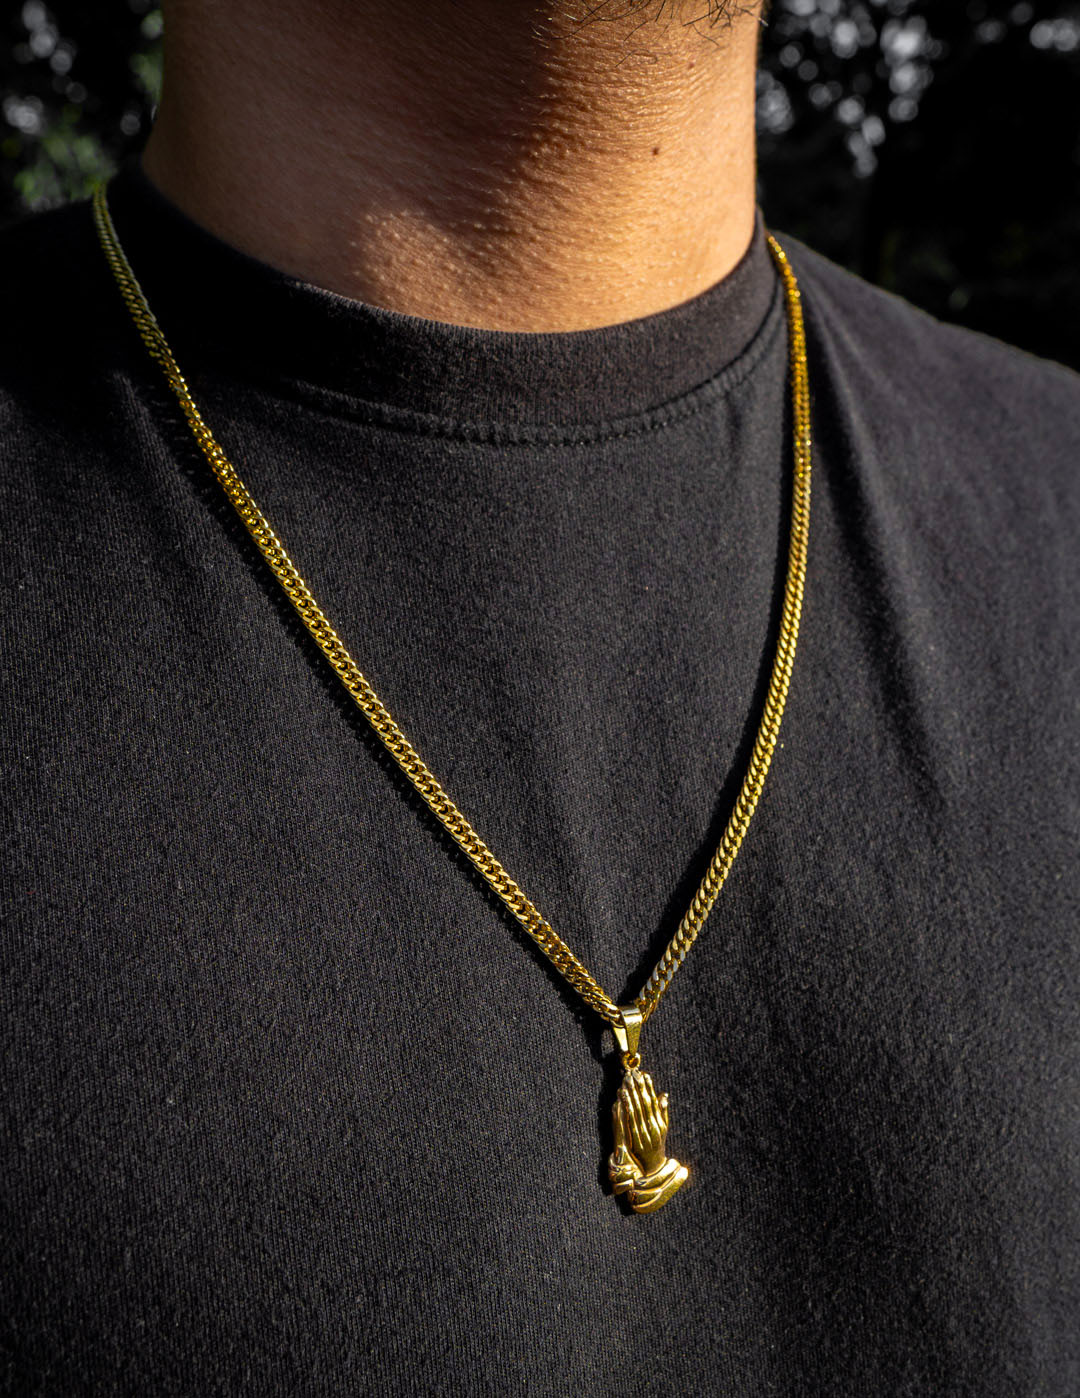 Mens Stainless Steel Necklace Gold Praying Hand Pendant with Curb Chain  Necklace (Free Jewelry Box)